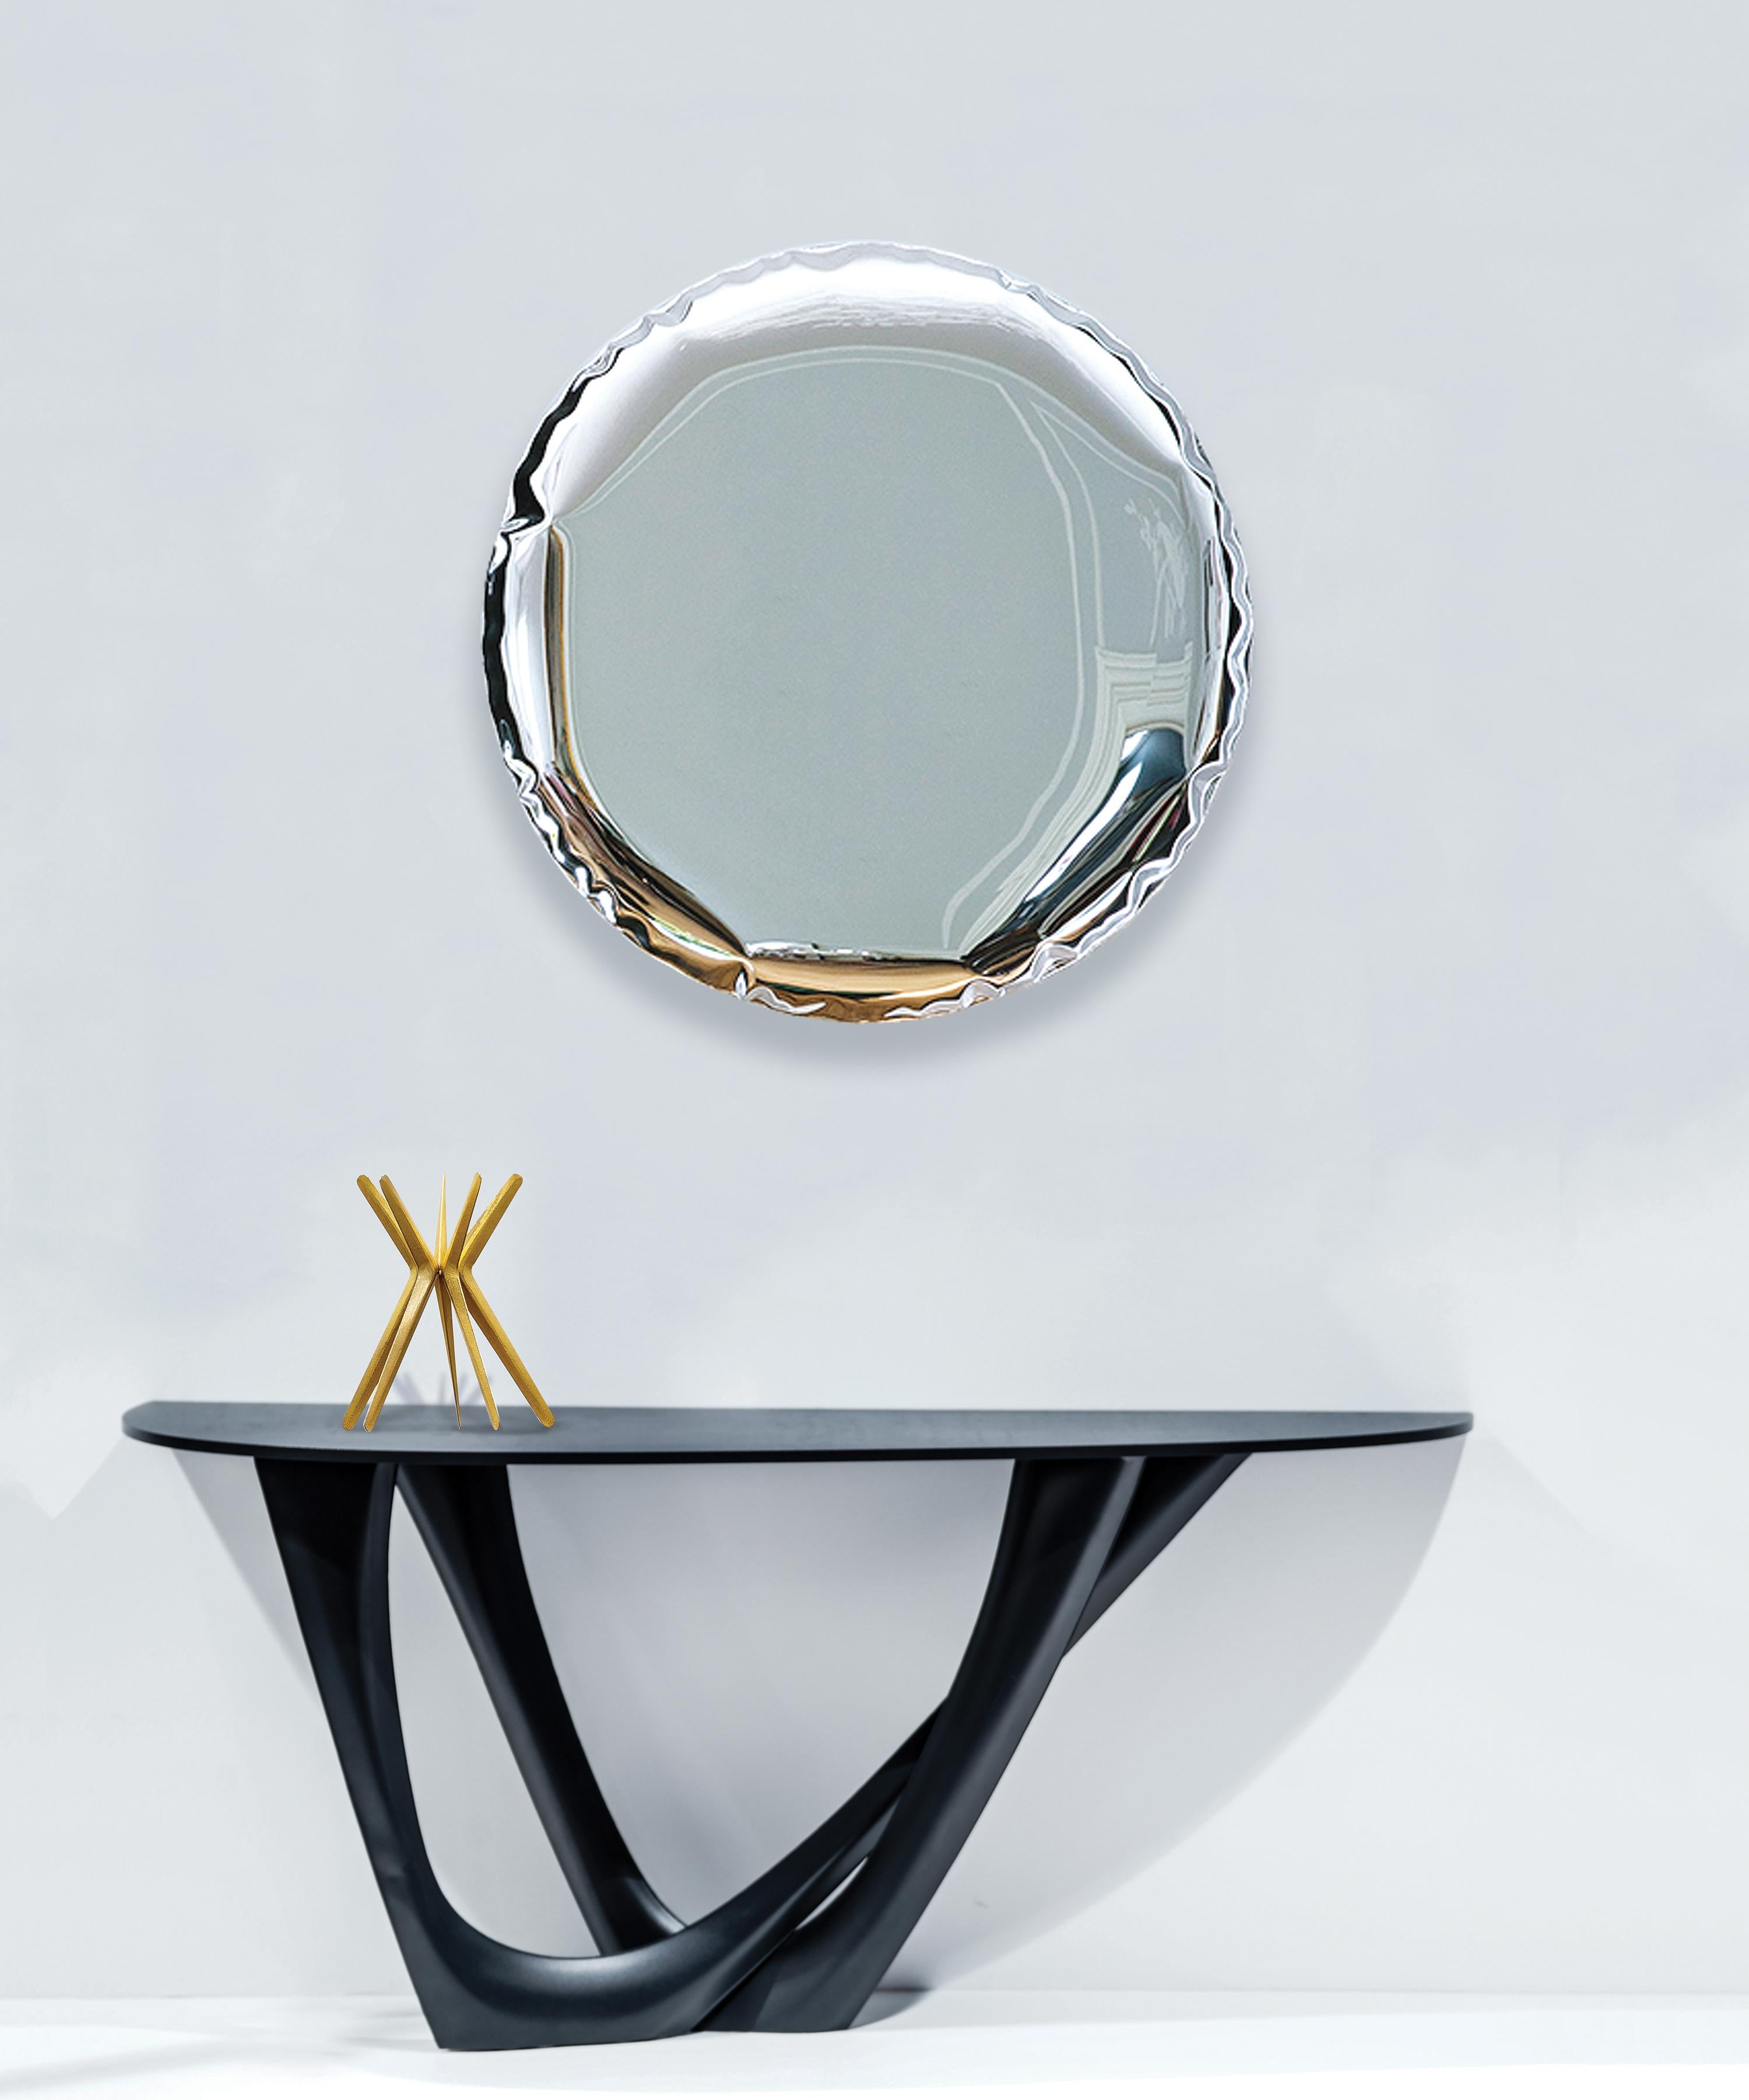 Helix Nebula Topaz Sapphire Oko 75 Sculptural Wall Mirror by Zieta
Dimensions: ø 75 x D 6 cm. 
Material: Stainless steel. 
Finish: Helix Nebula Topaz Sapphire transition. 

Available in different finishes. Also available in different sizes: ø 95, ø